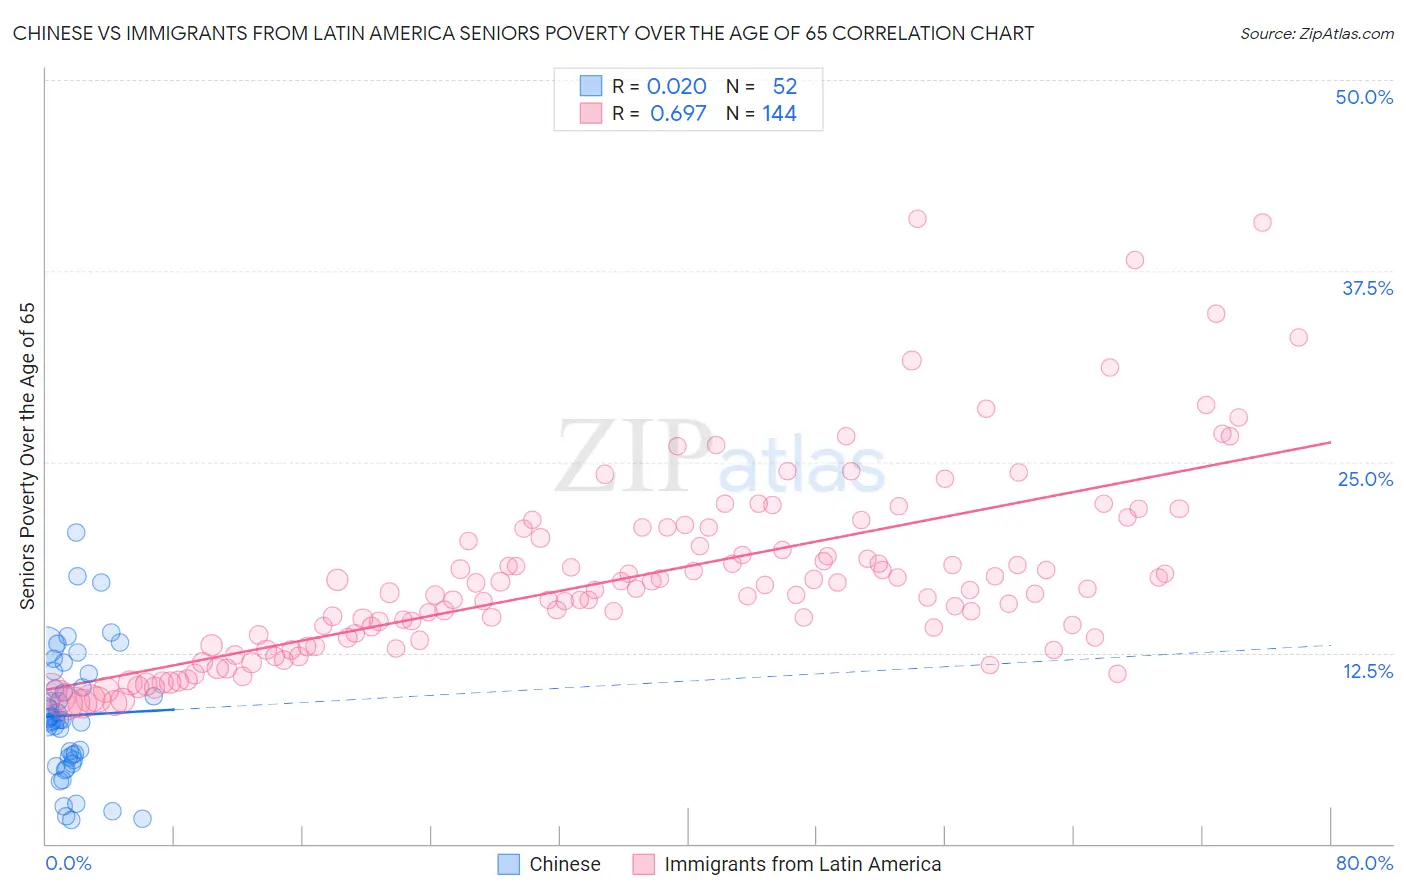 Chinese vs Immigrants from Latin America Seniors Poverty Over the Age of 65